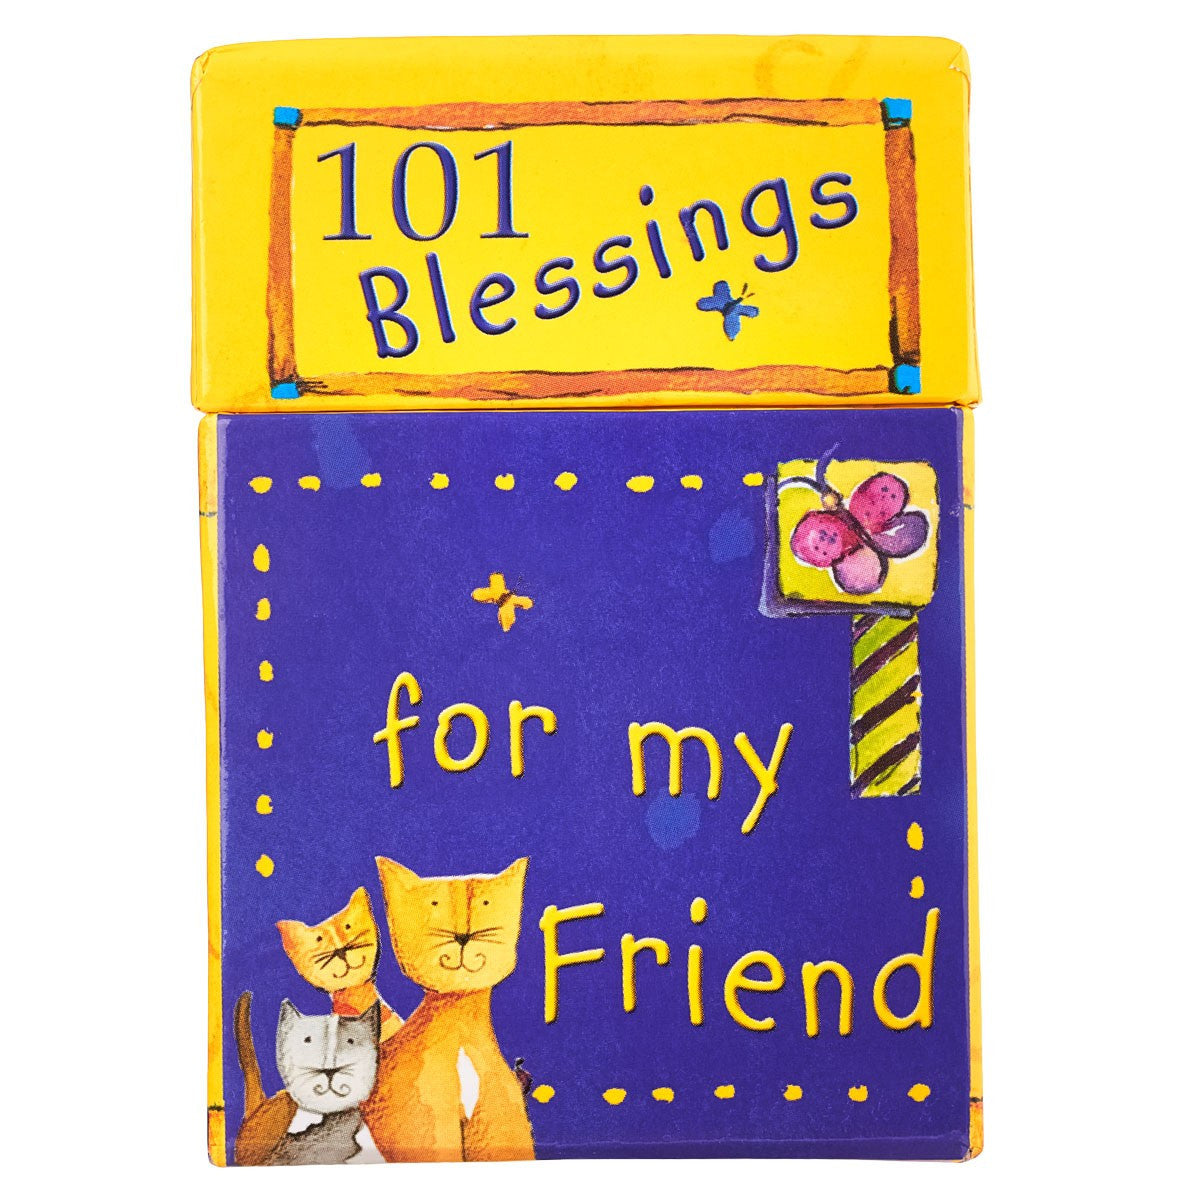 101 Blessings for my Friend